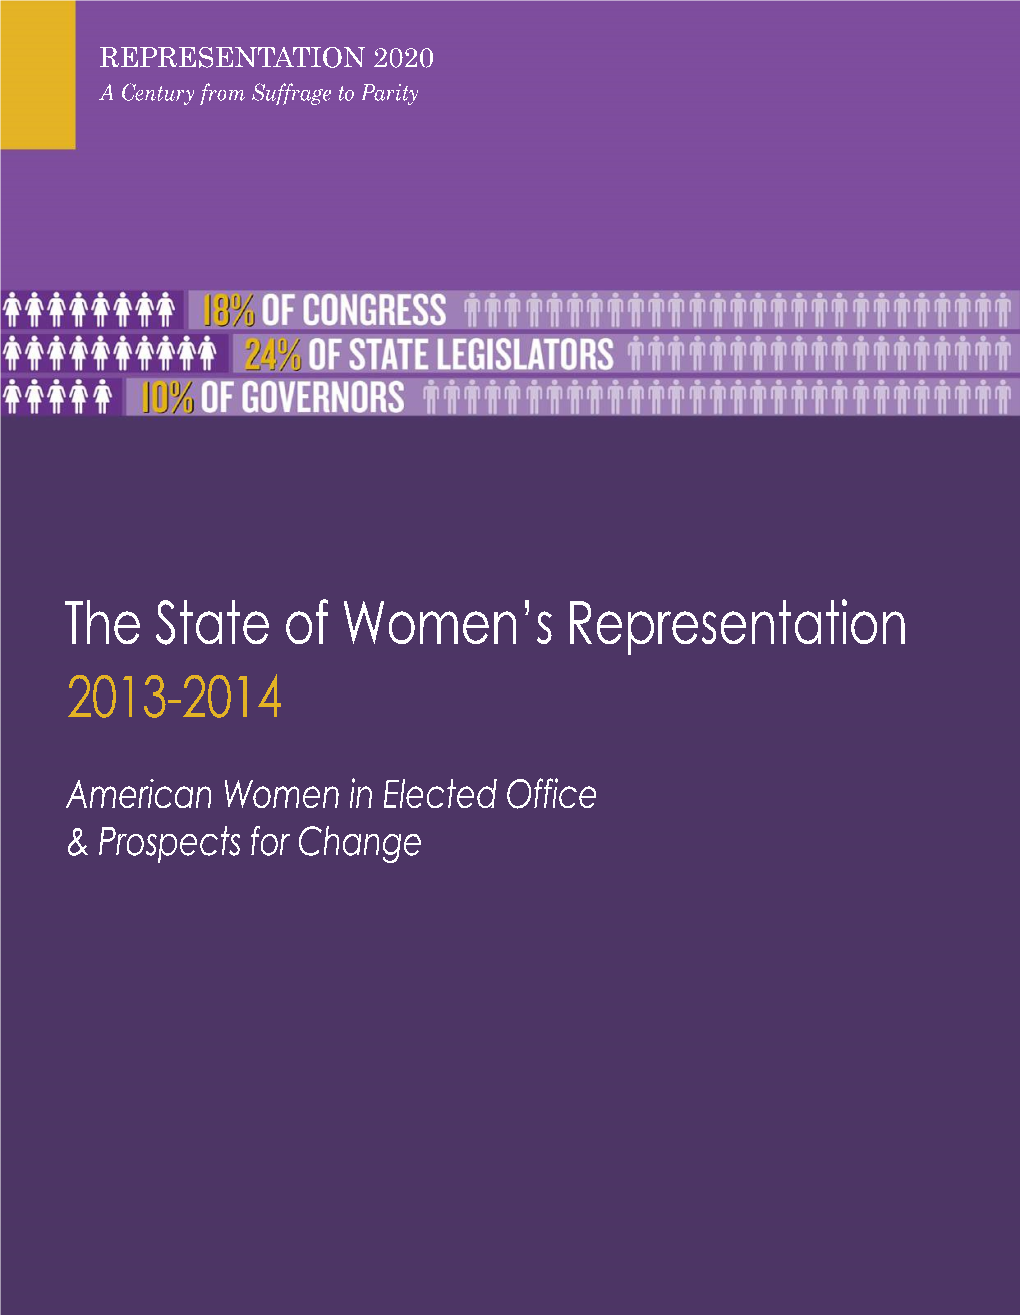 The State of Women's Representation 2013-2014